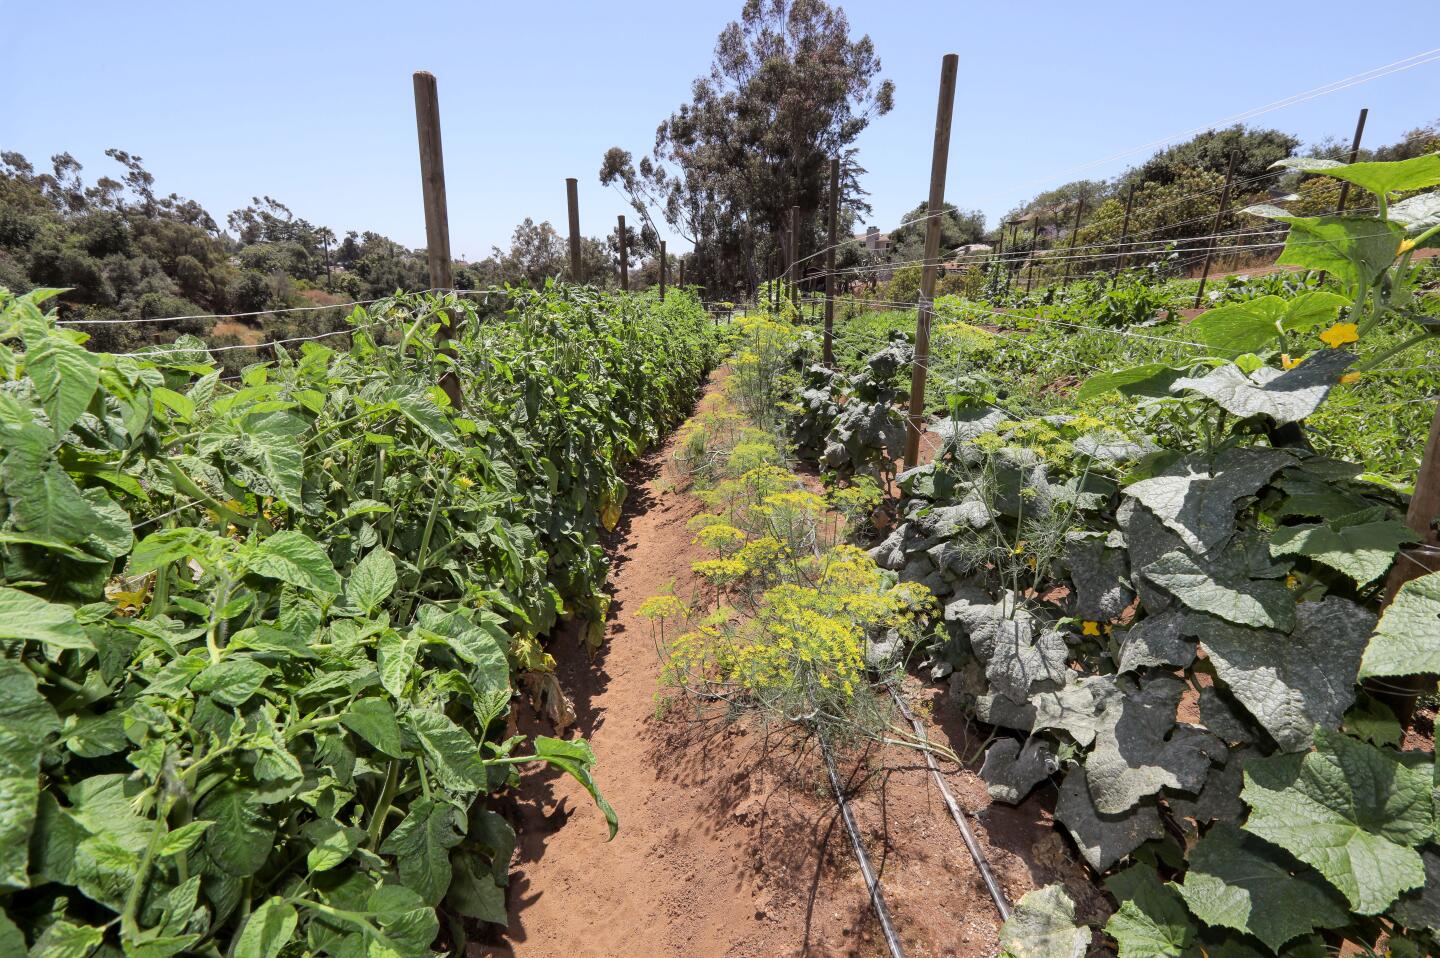 Rows of various things grow at Sand N' Straw Community Farm. At left are tomatoes, at right are cucumbers and in the middle is dill.